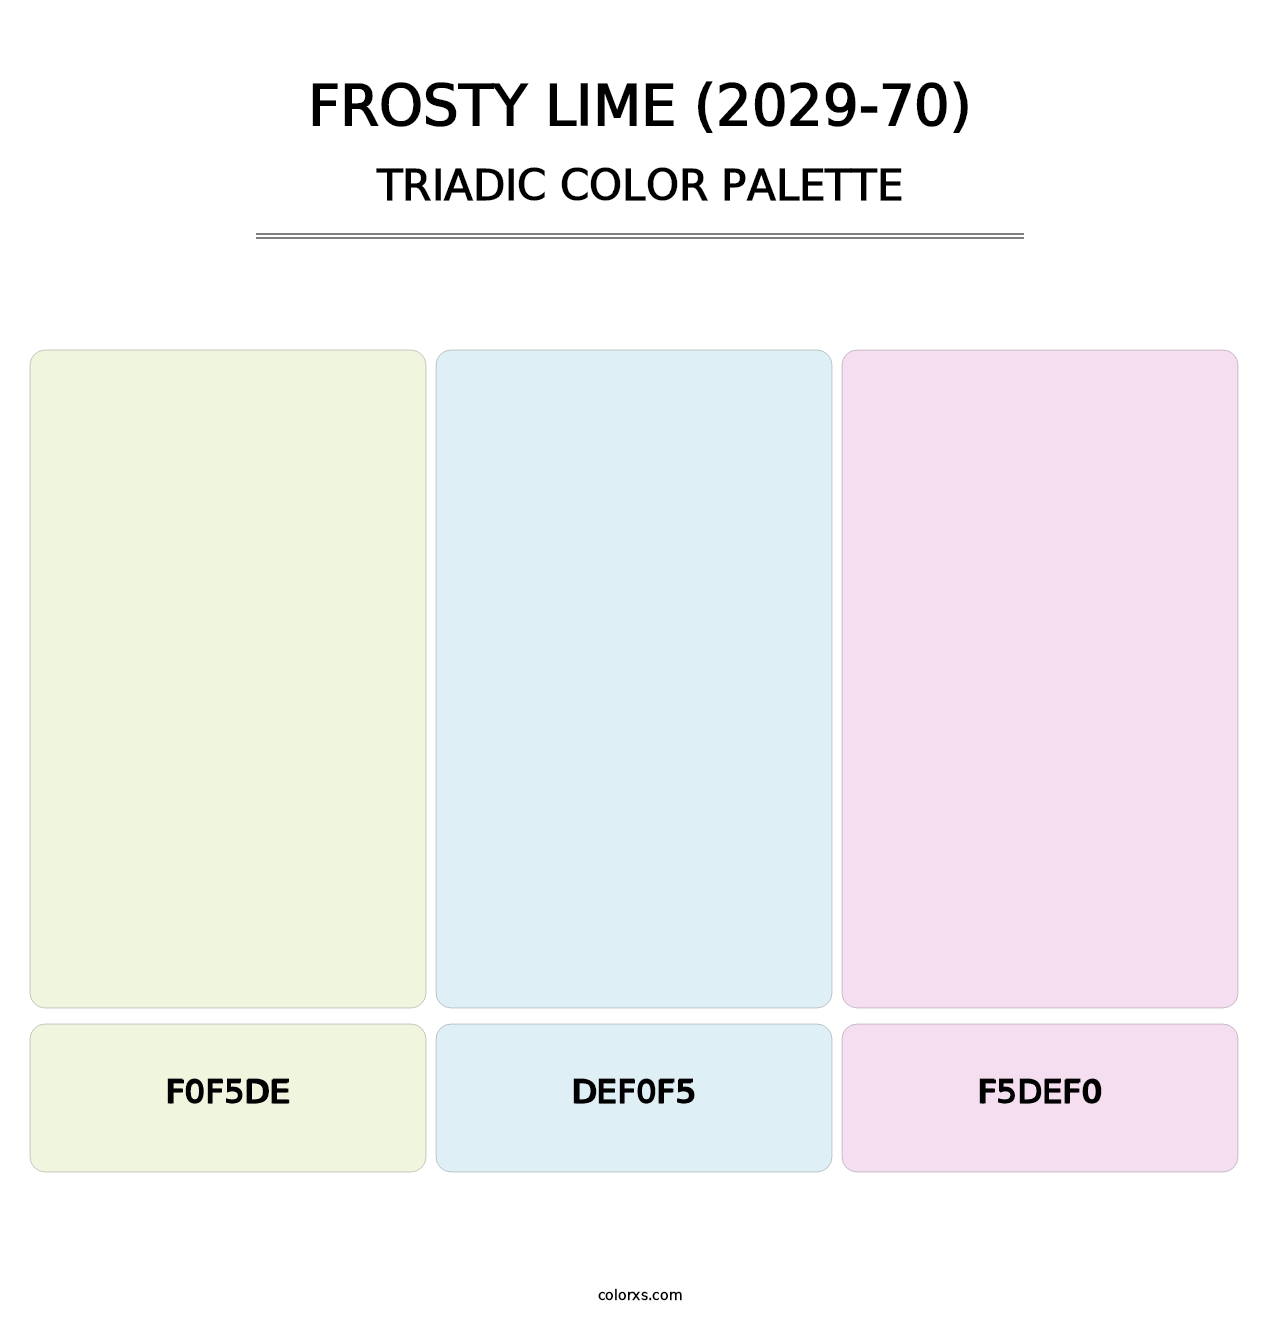 Frosty Lime (2029-70) - Triadic Color Palette